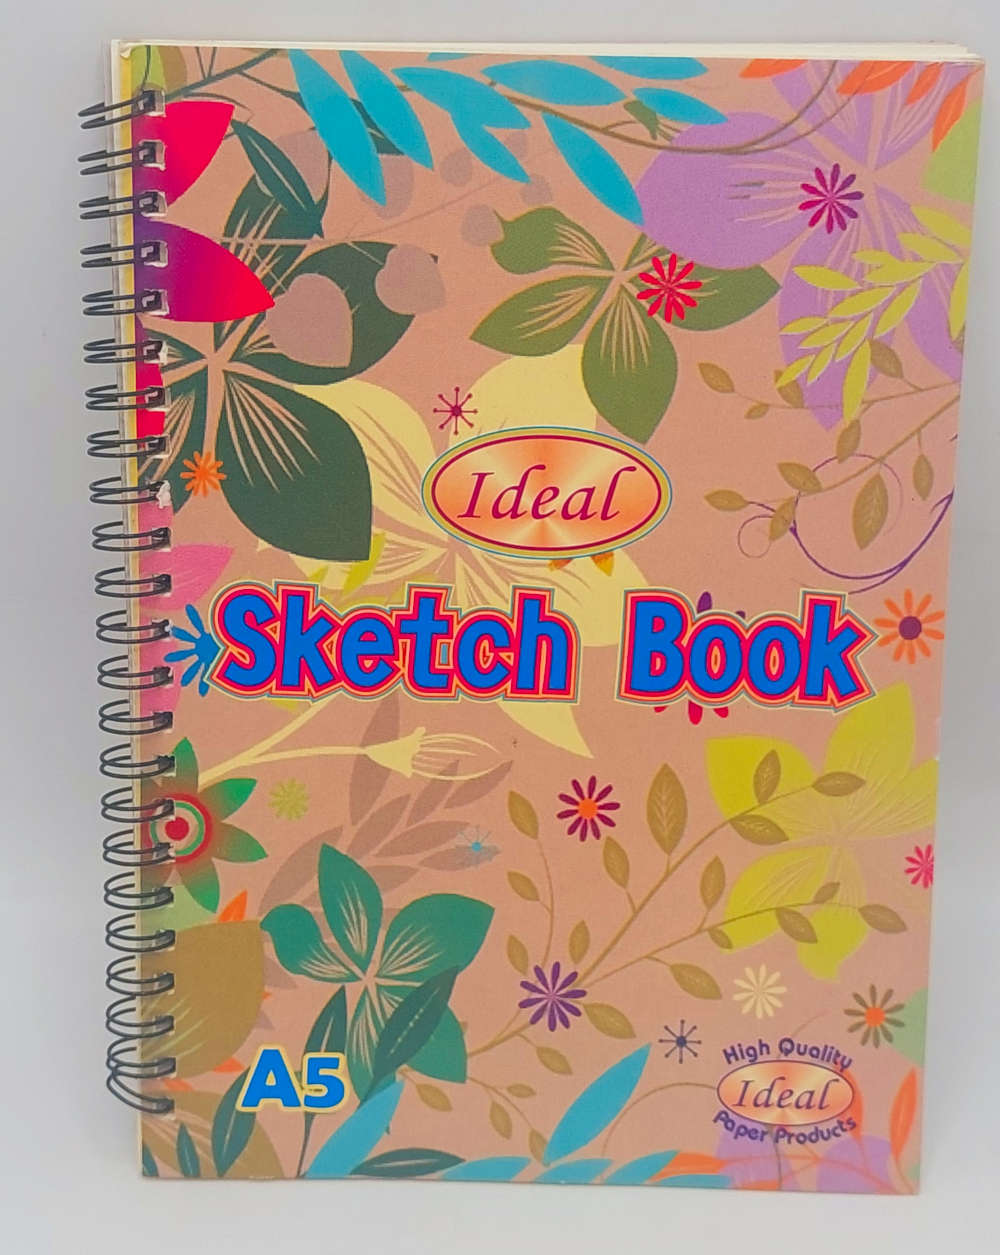 Buy Ideal Sketch Book Ideal A5 Spiral Binding For Pencil Sketching